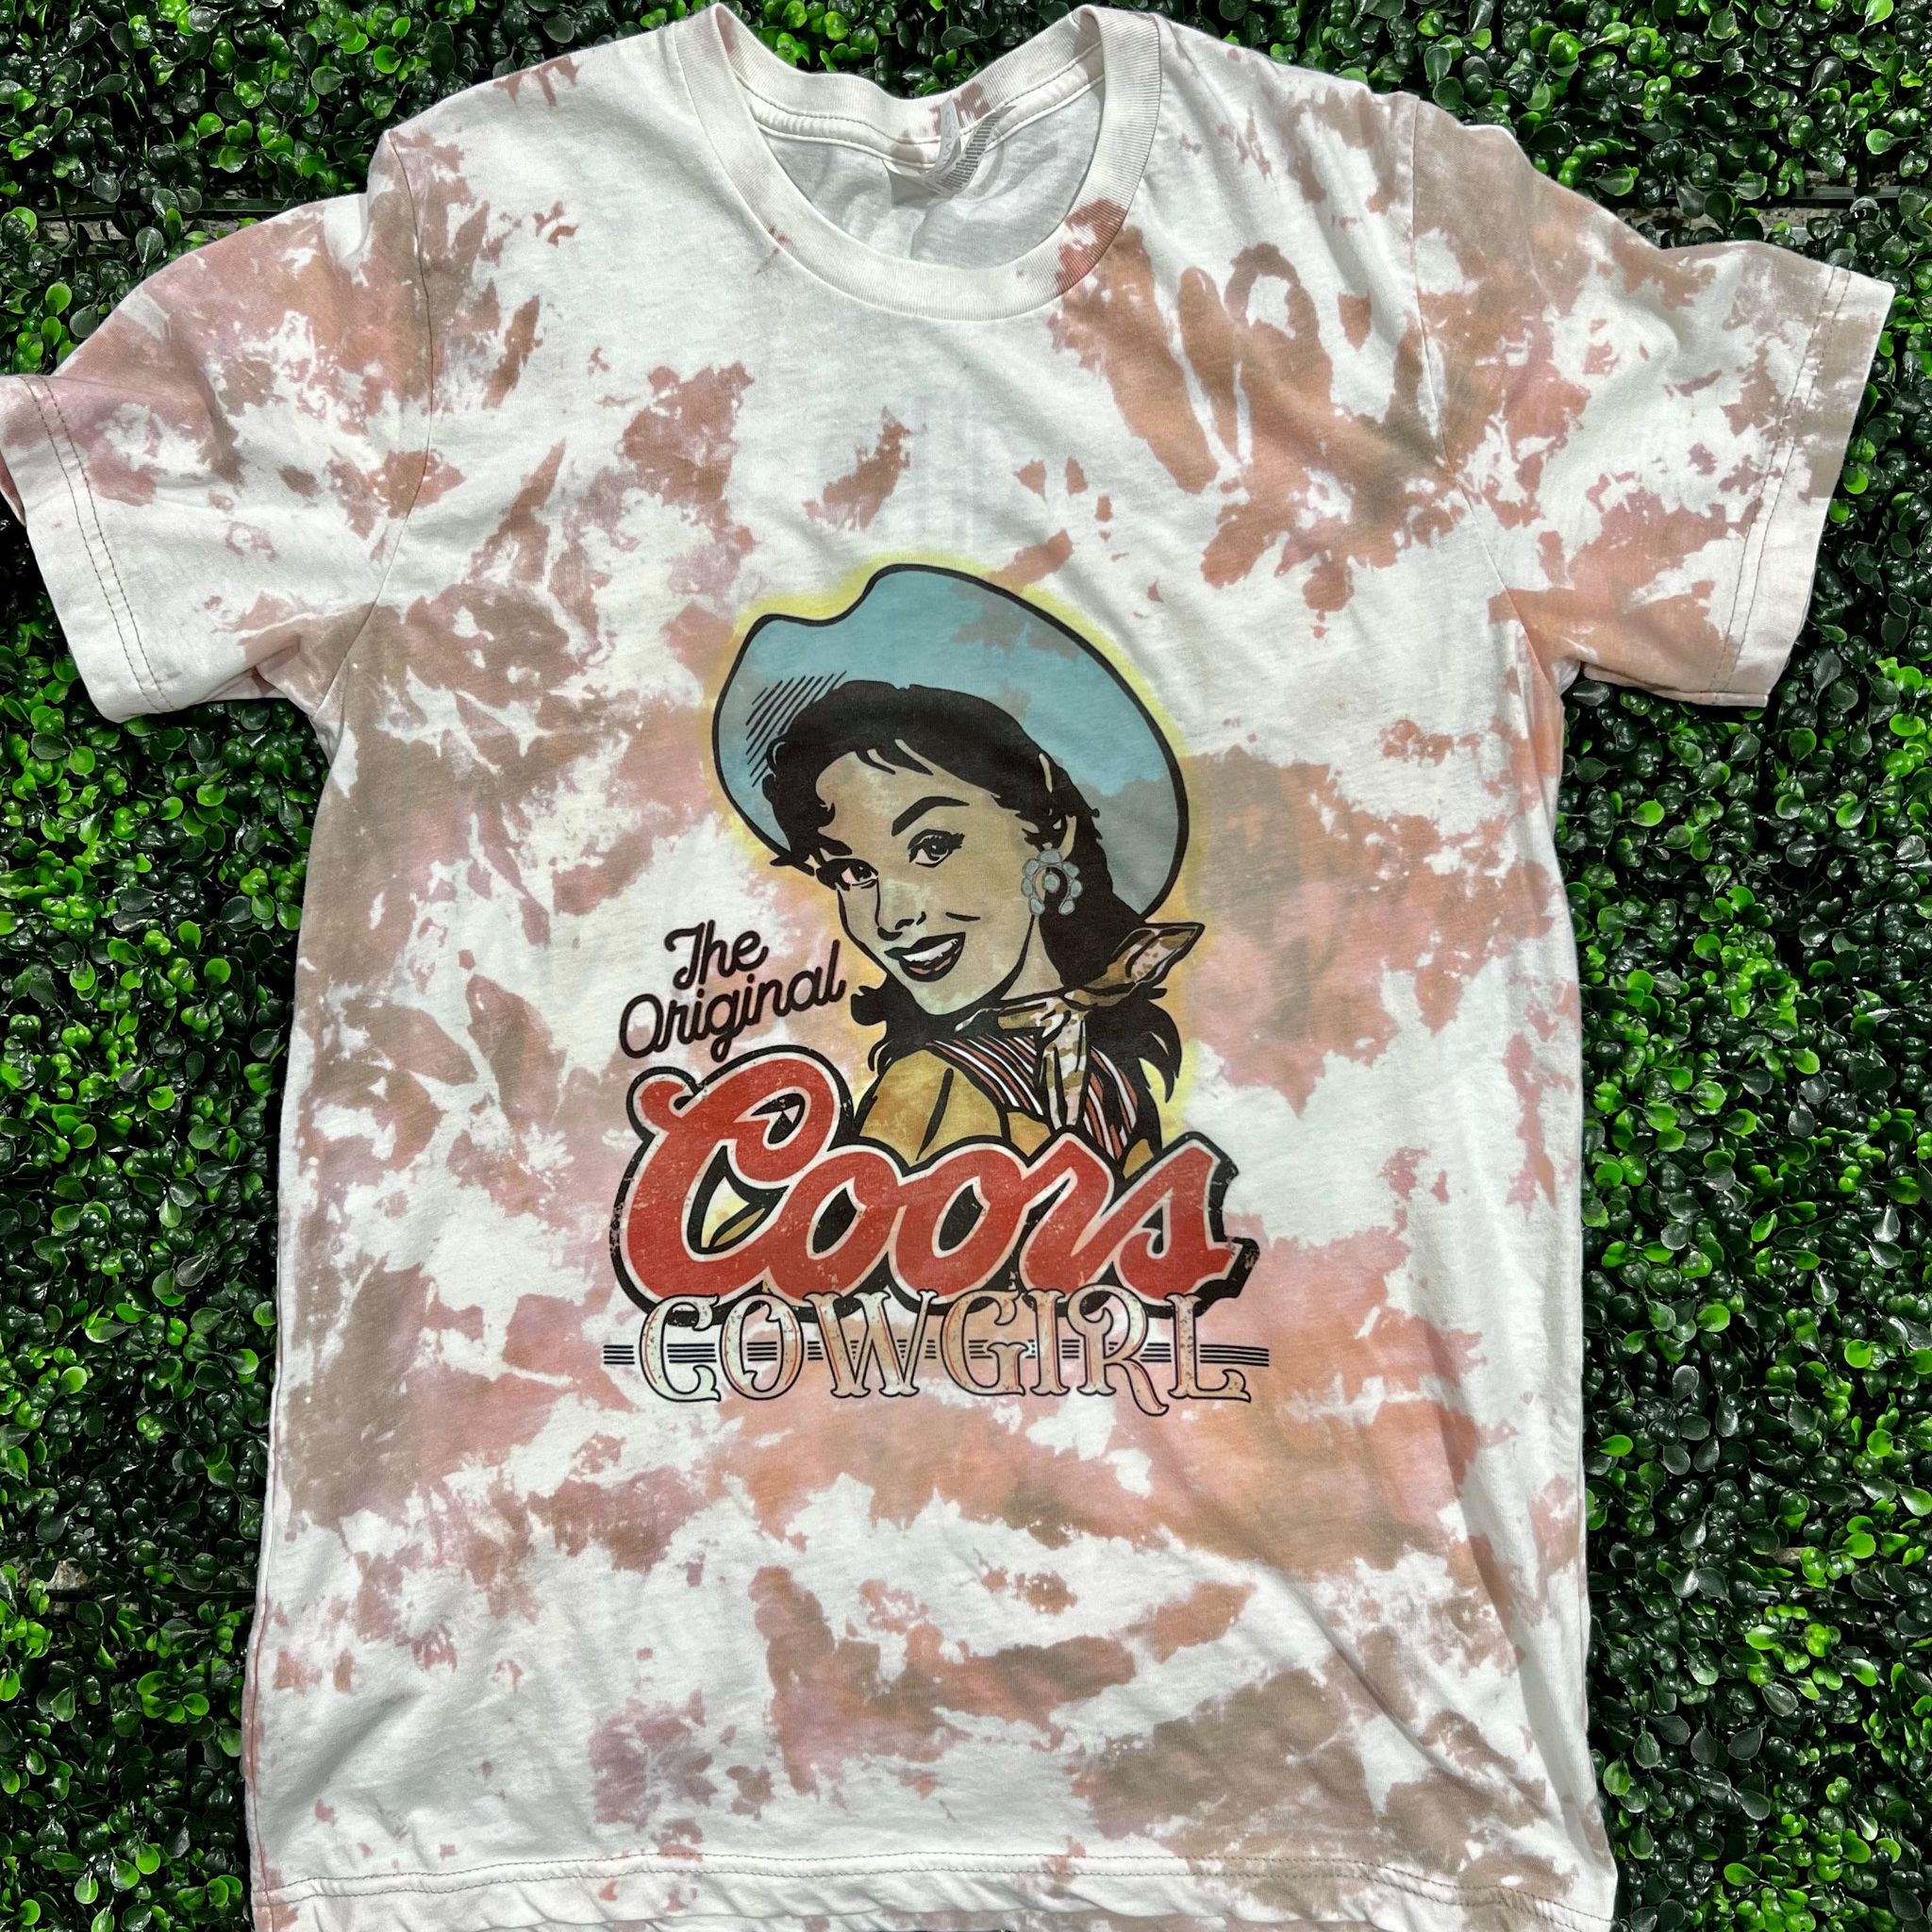 Coors Cowgirl Top Design